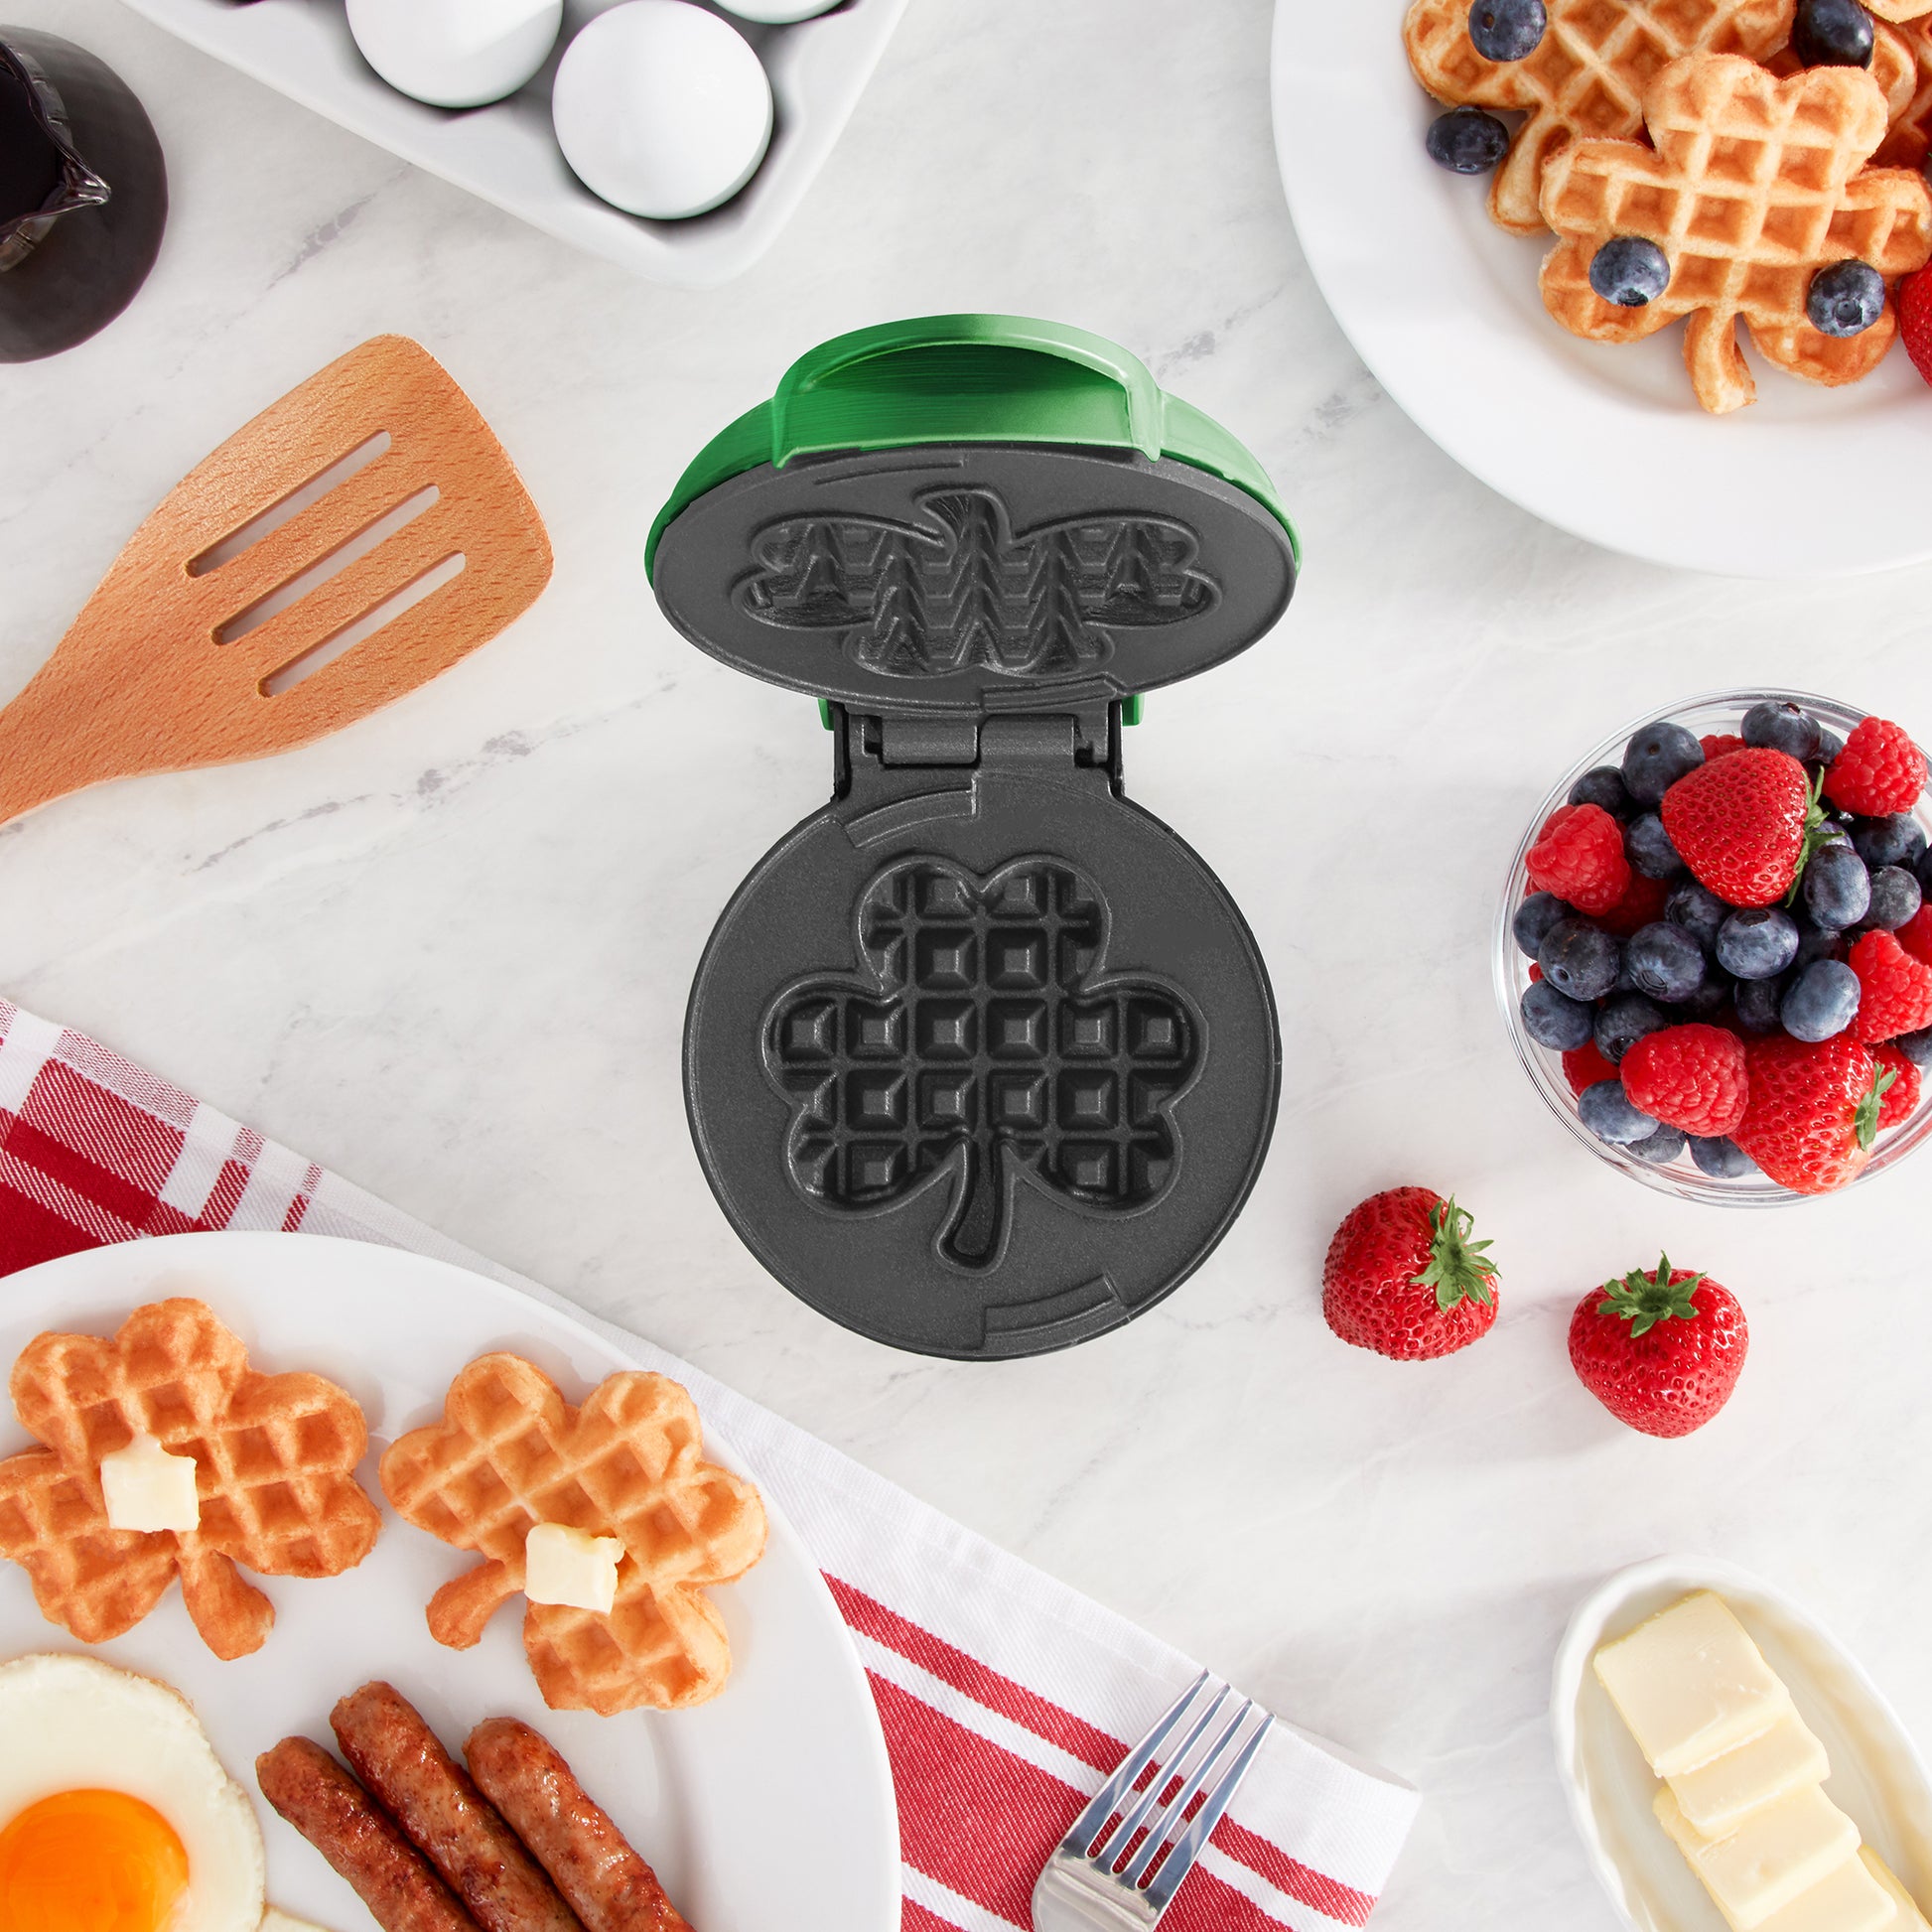 The Dash Mini Waffle Maker Everyone's Talking About